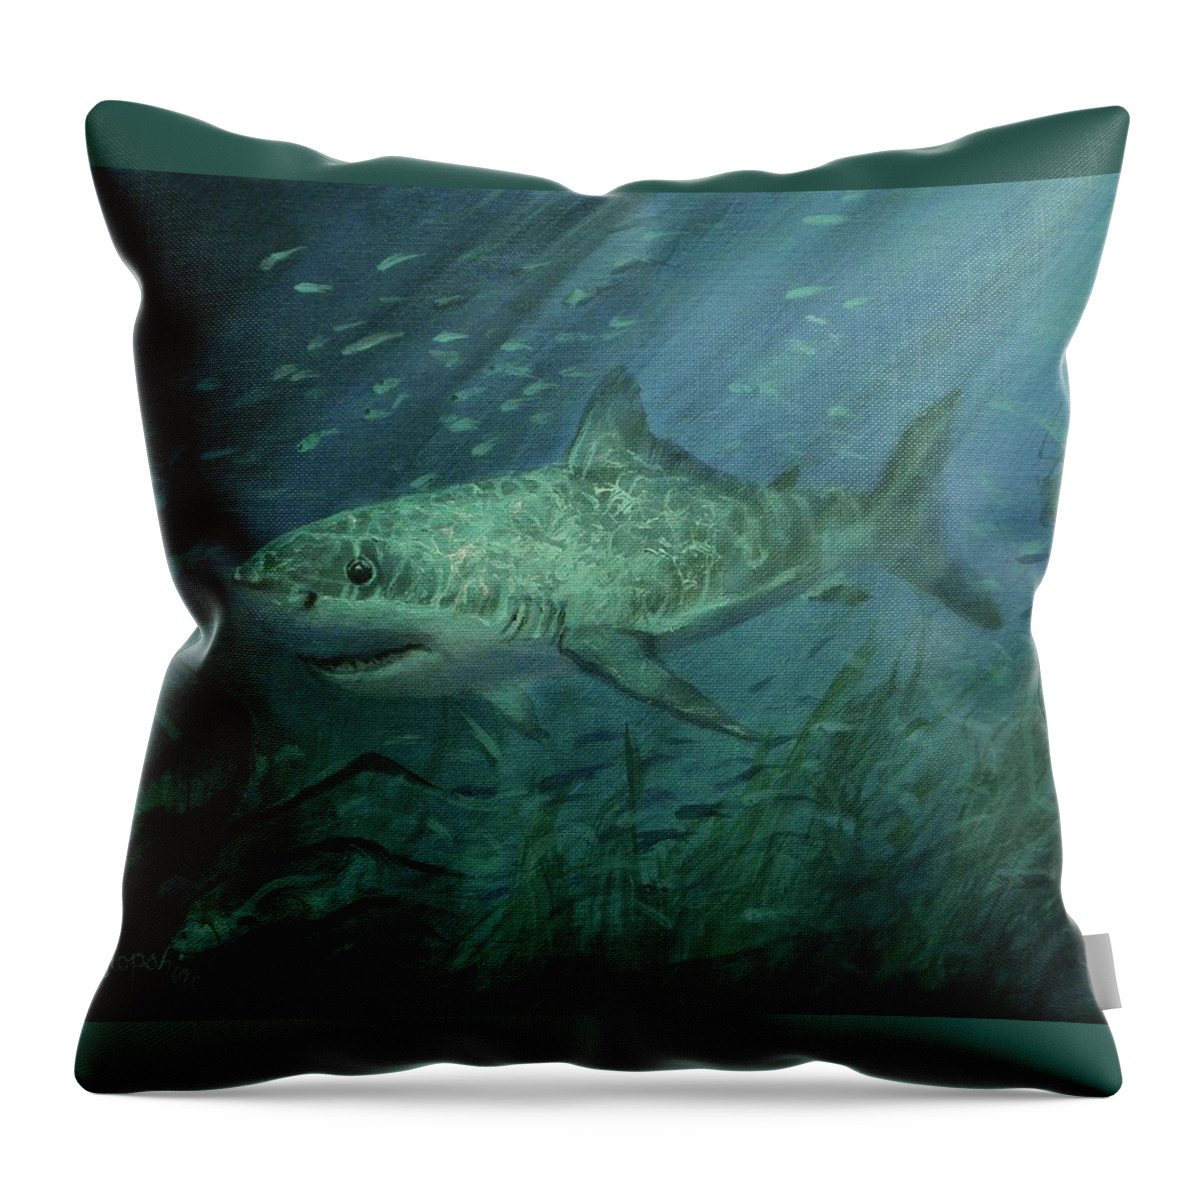 Shark Throw Pillow featuring the painting Megadolon Shark by Tom Shropshire